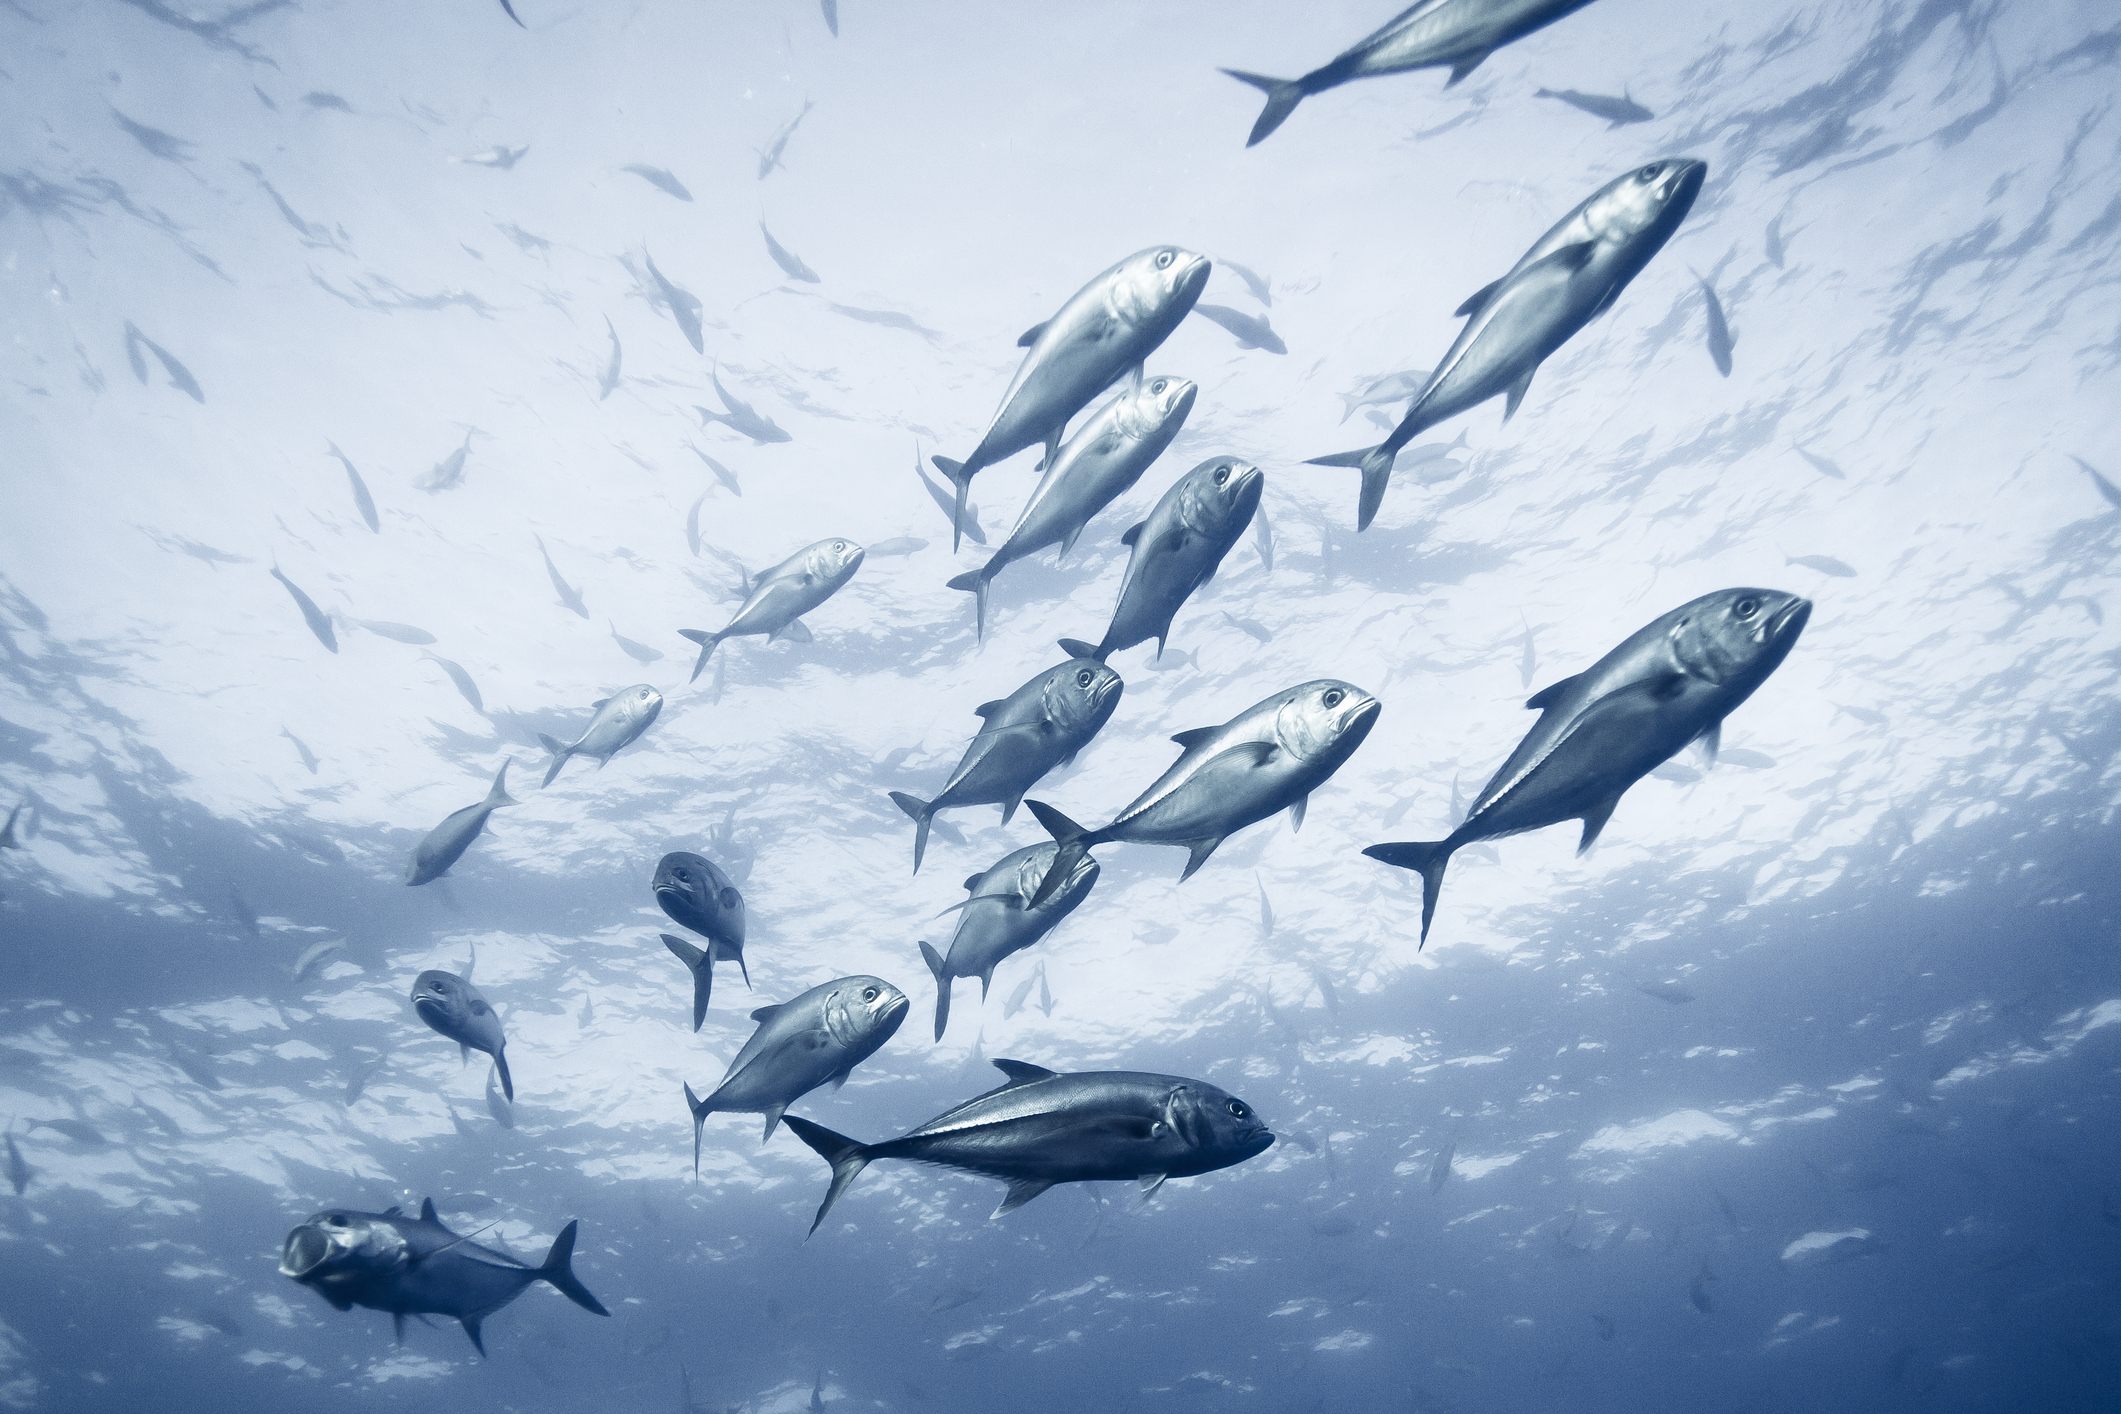 A school of fish swimming together underwater in the sea (Noel Hendrickson—Getty Images)